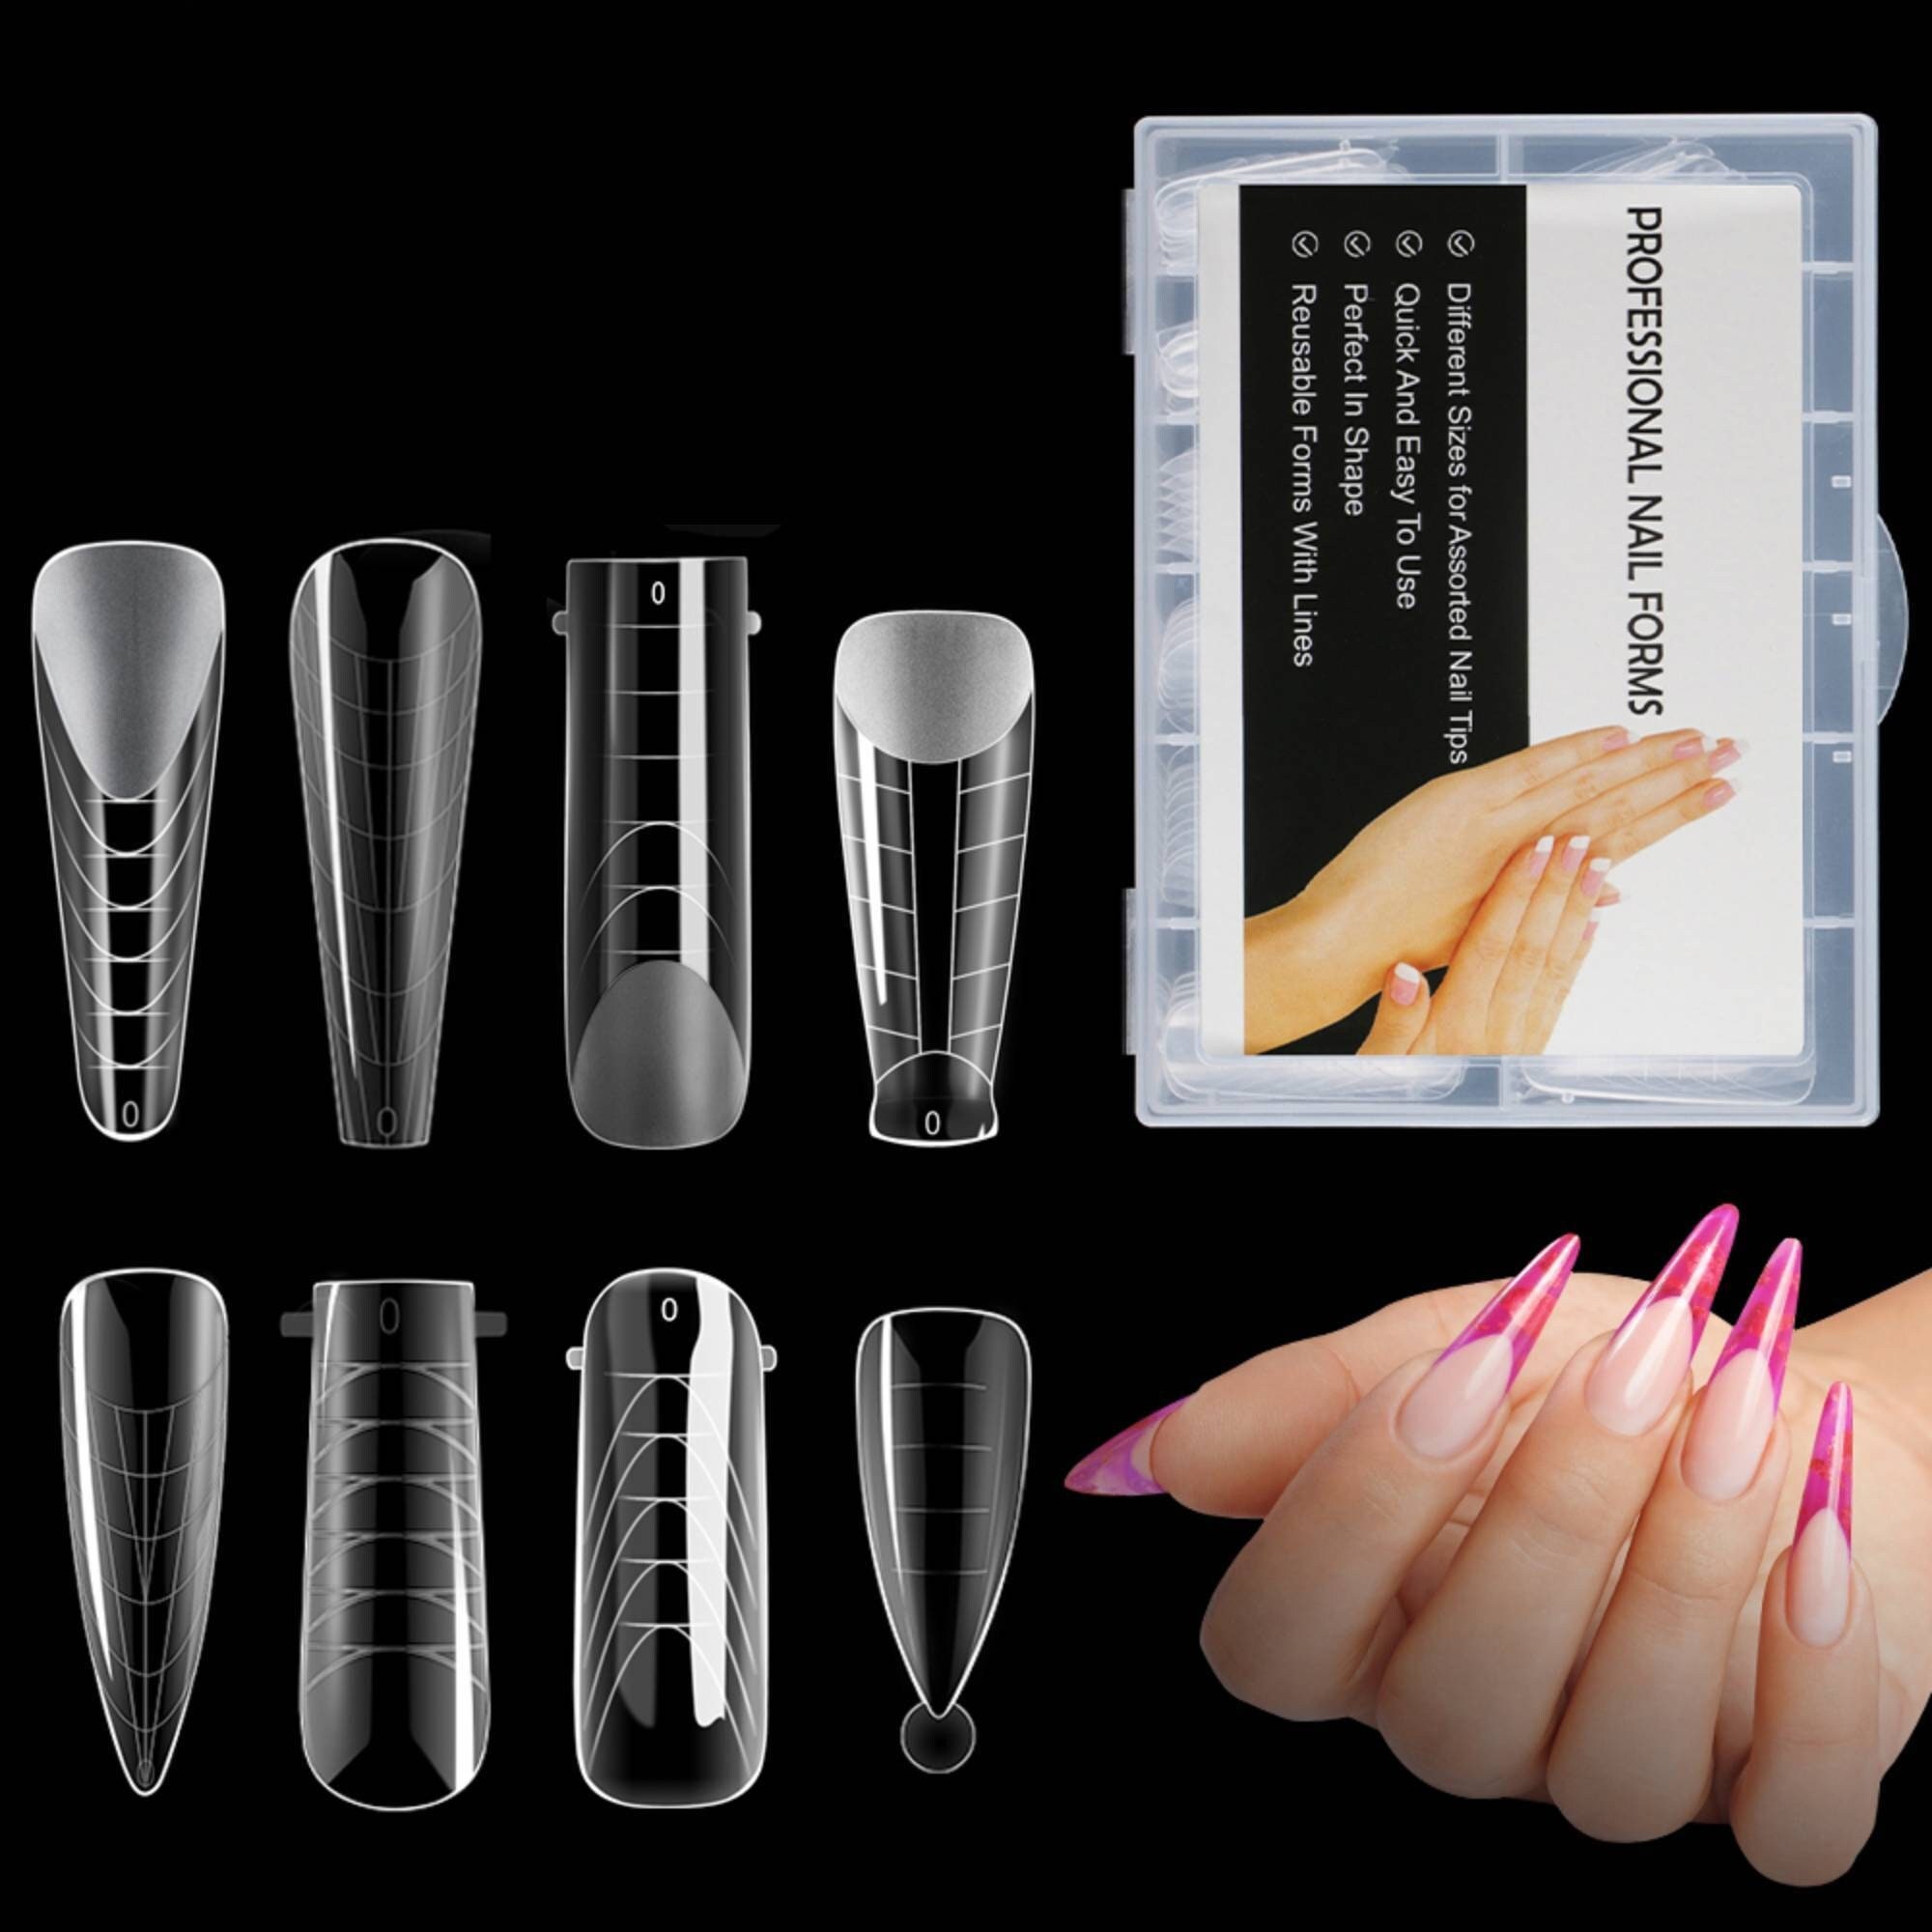 Paper Nail Form For Acrylic UV Gel Extension - Limegirlstore